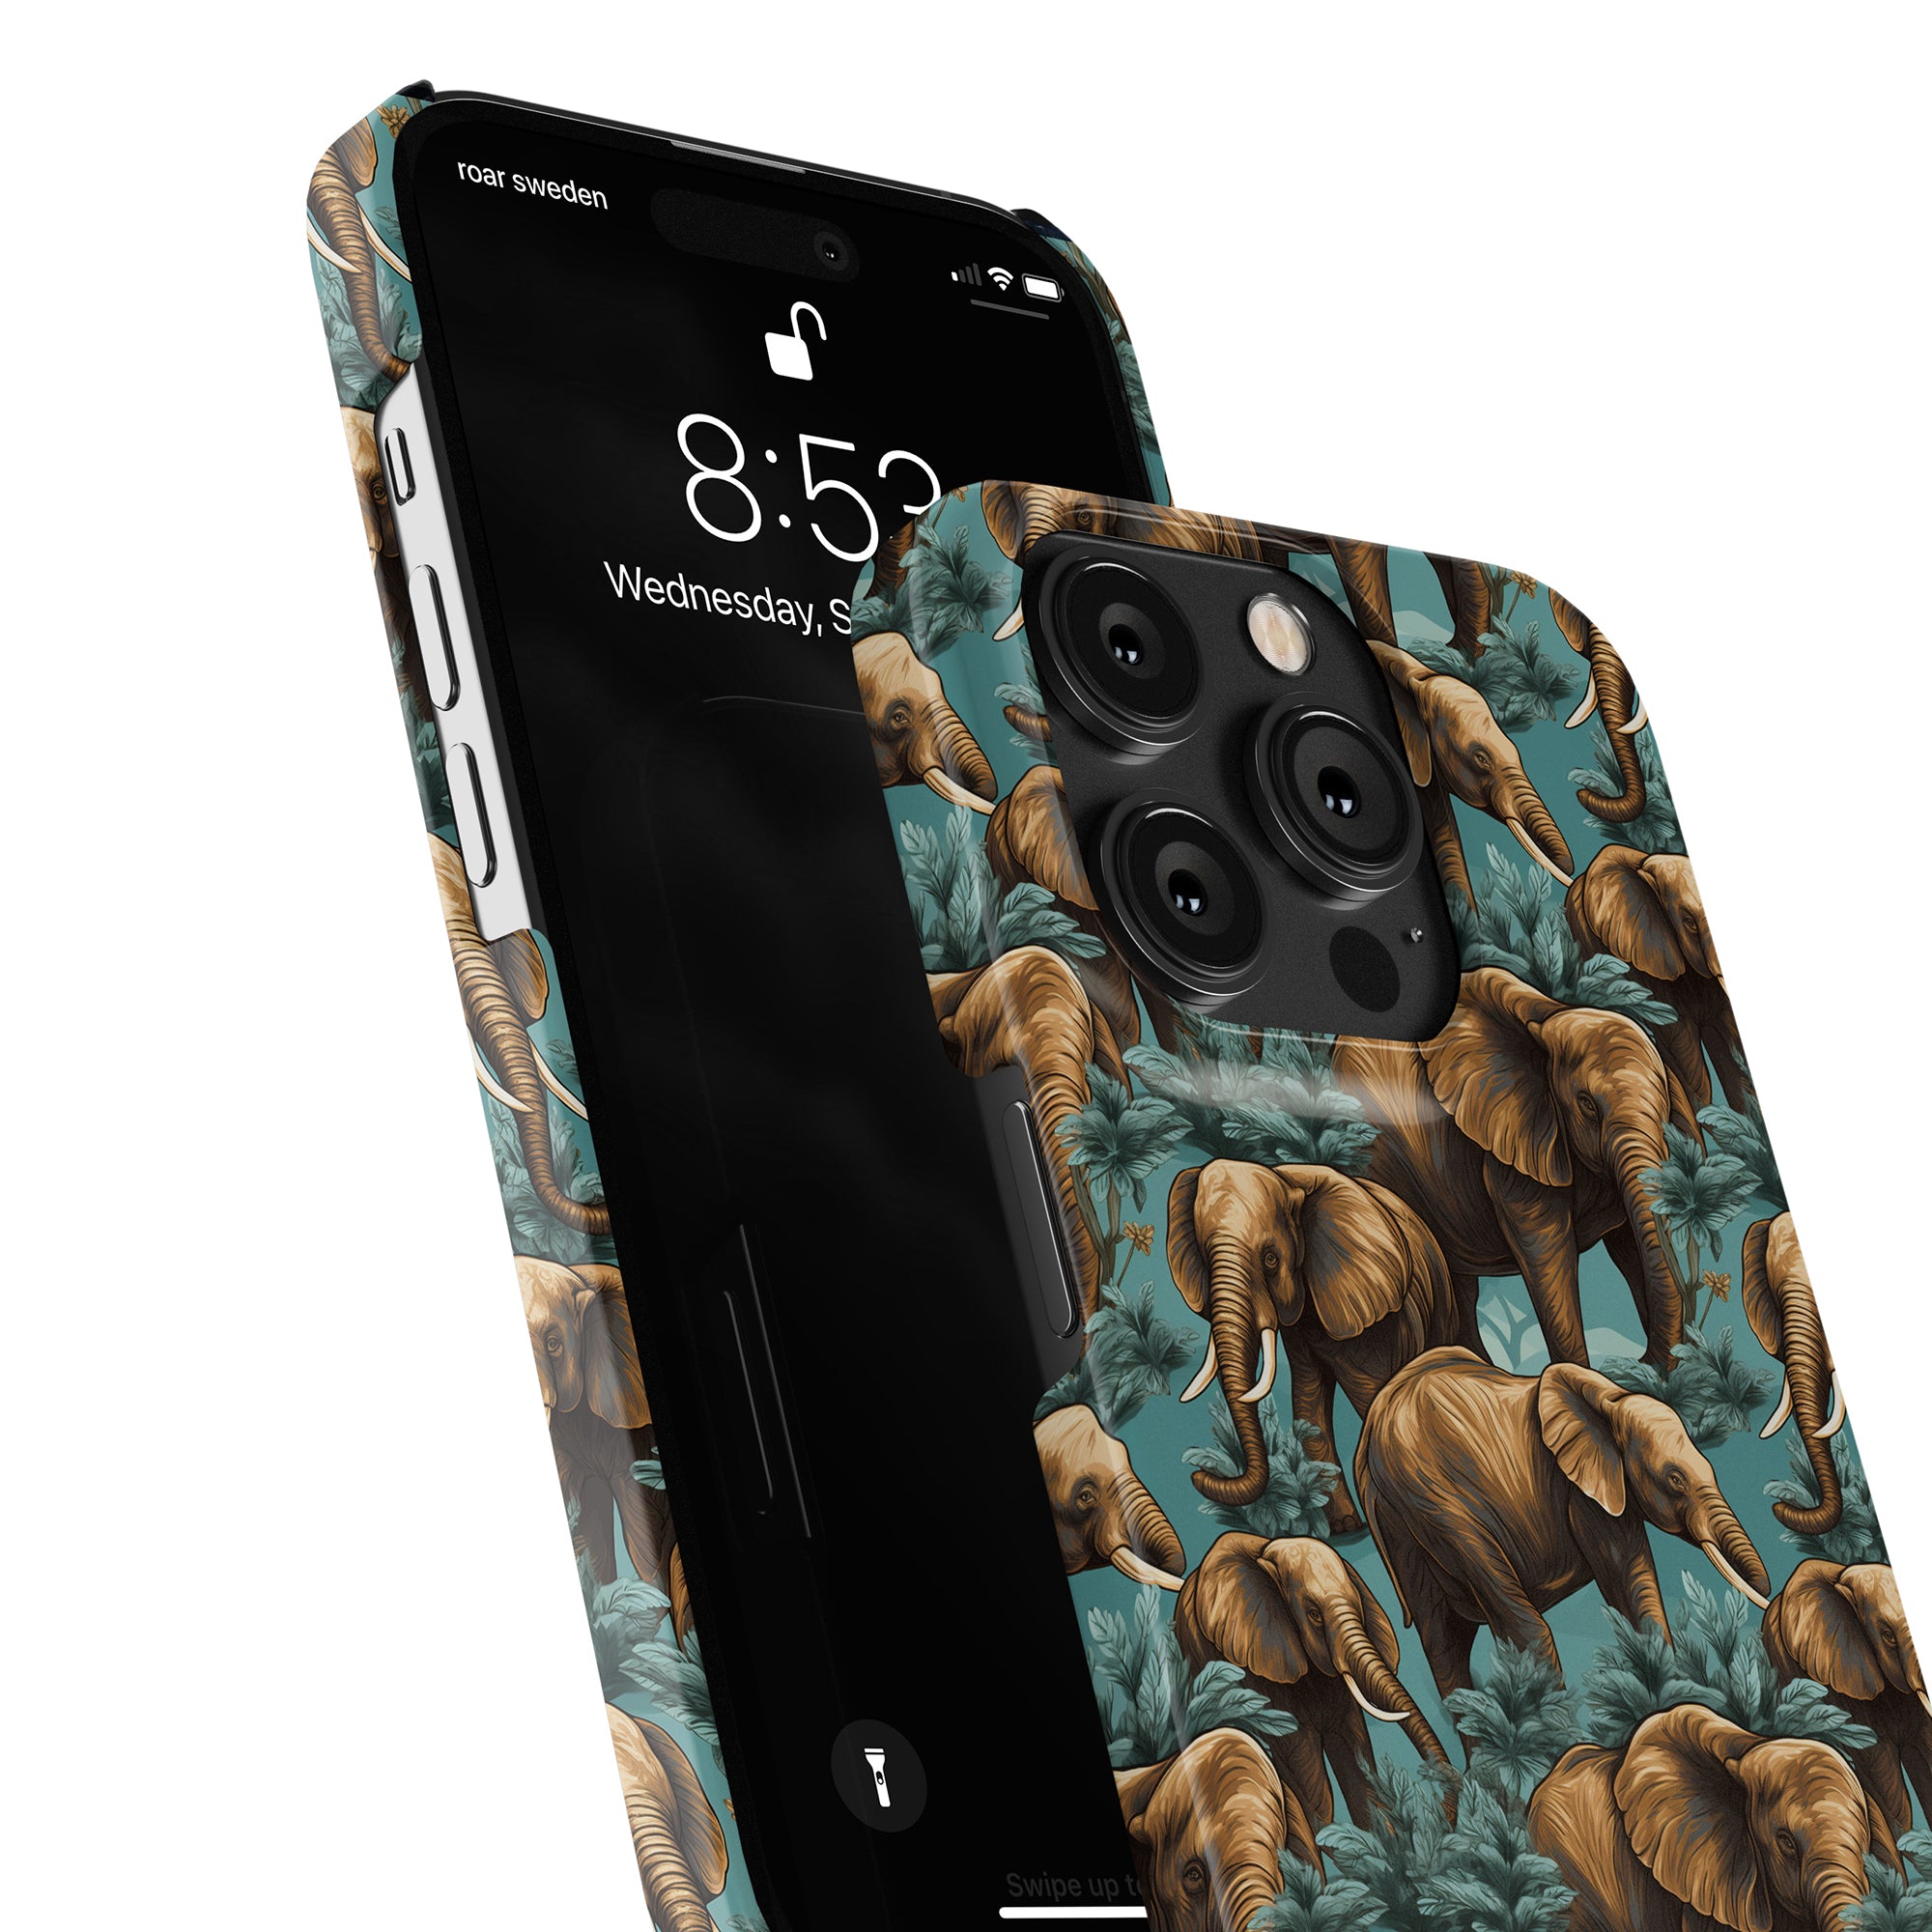 A smartphone with a home screen displaying the time and date is placed in a Hathi - Slim case from the Safari Collection, decorated with a pattern of elephants.